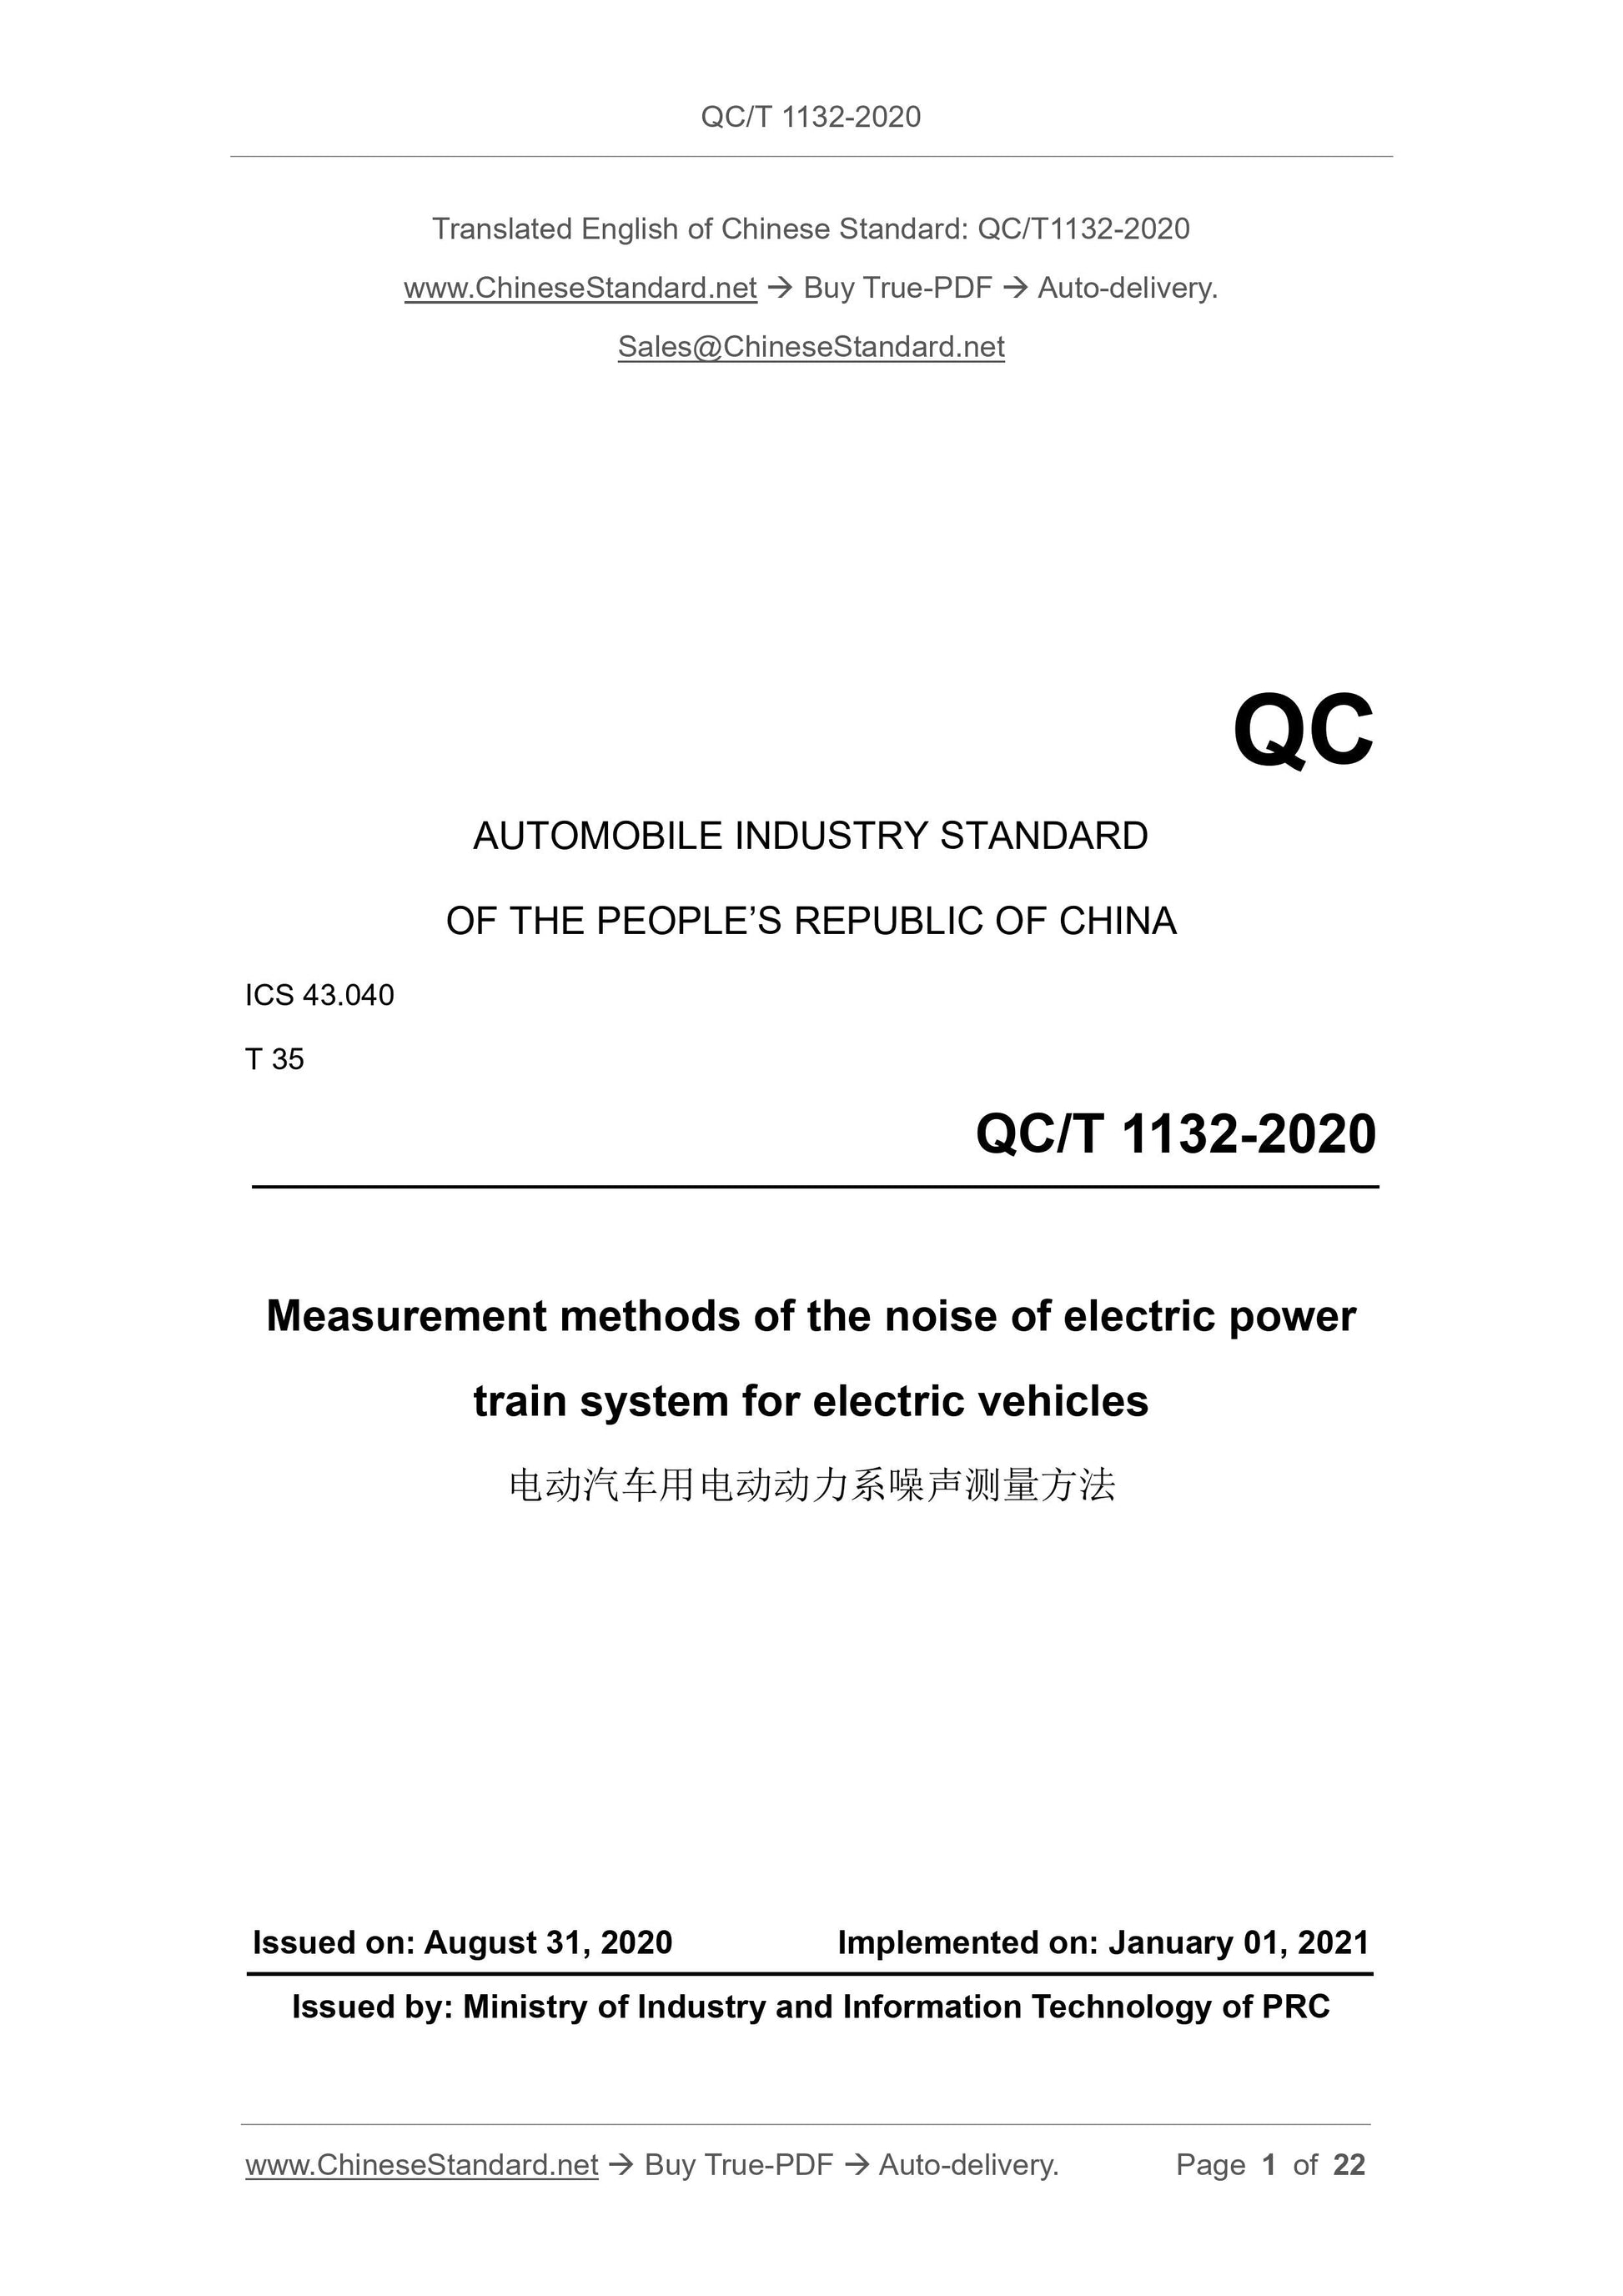 QC/T 1132-2020 Page 1